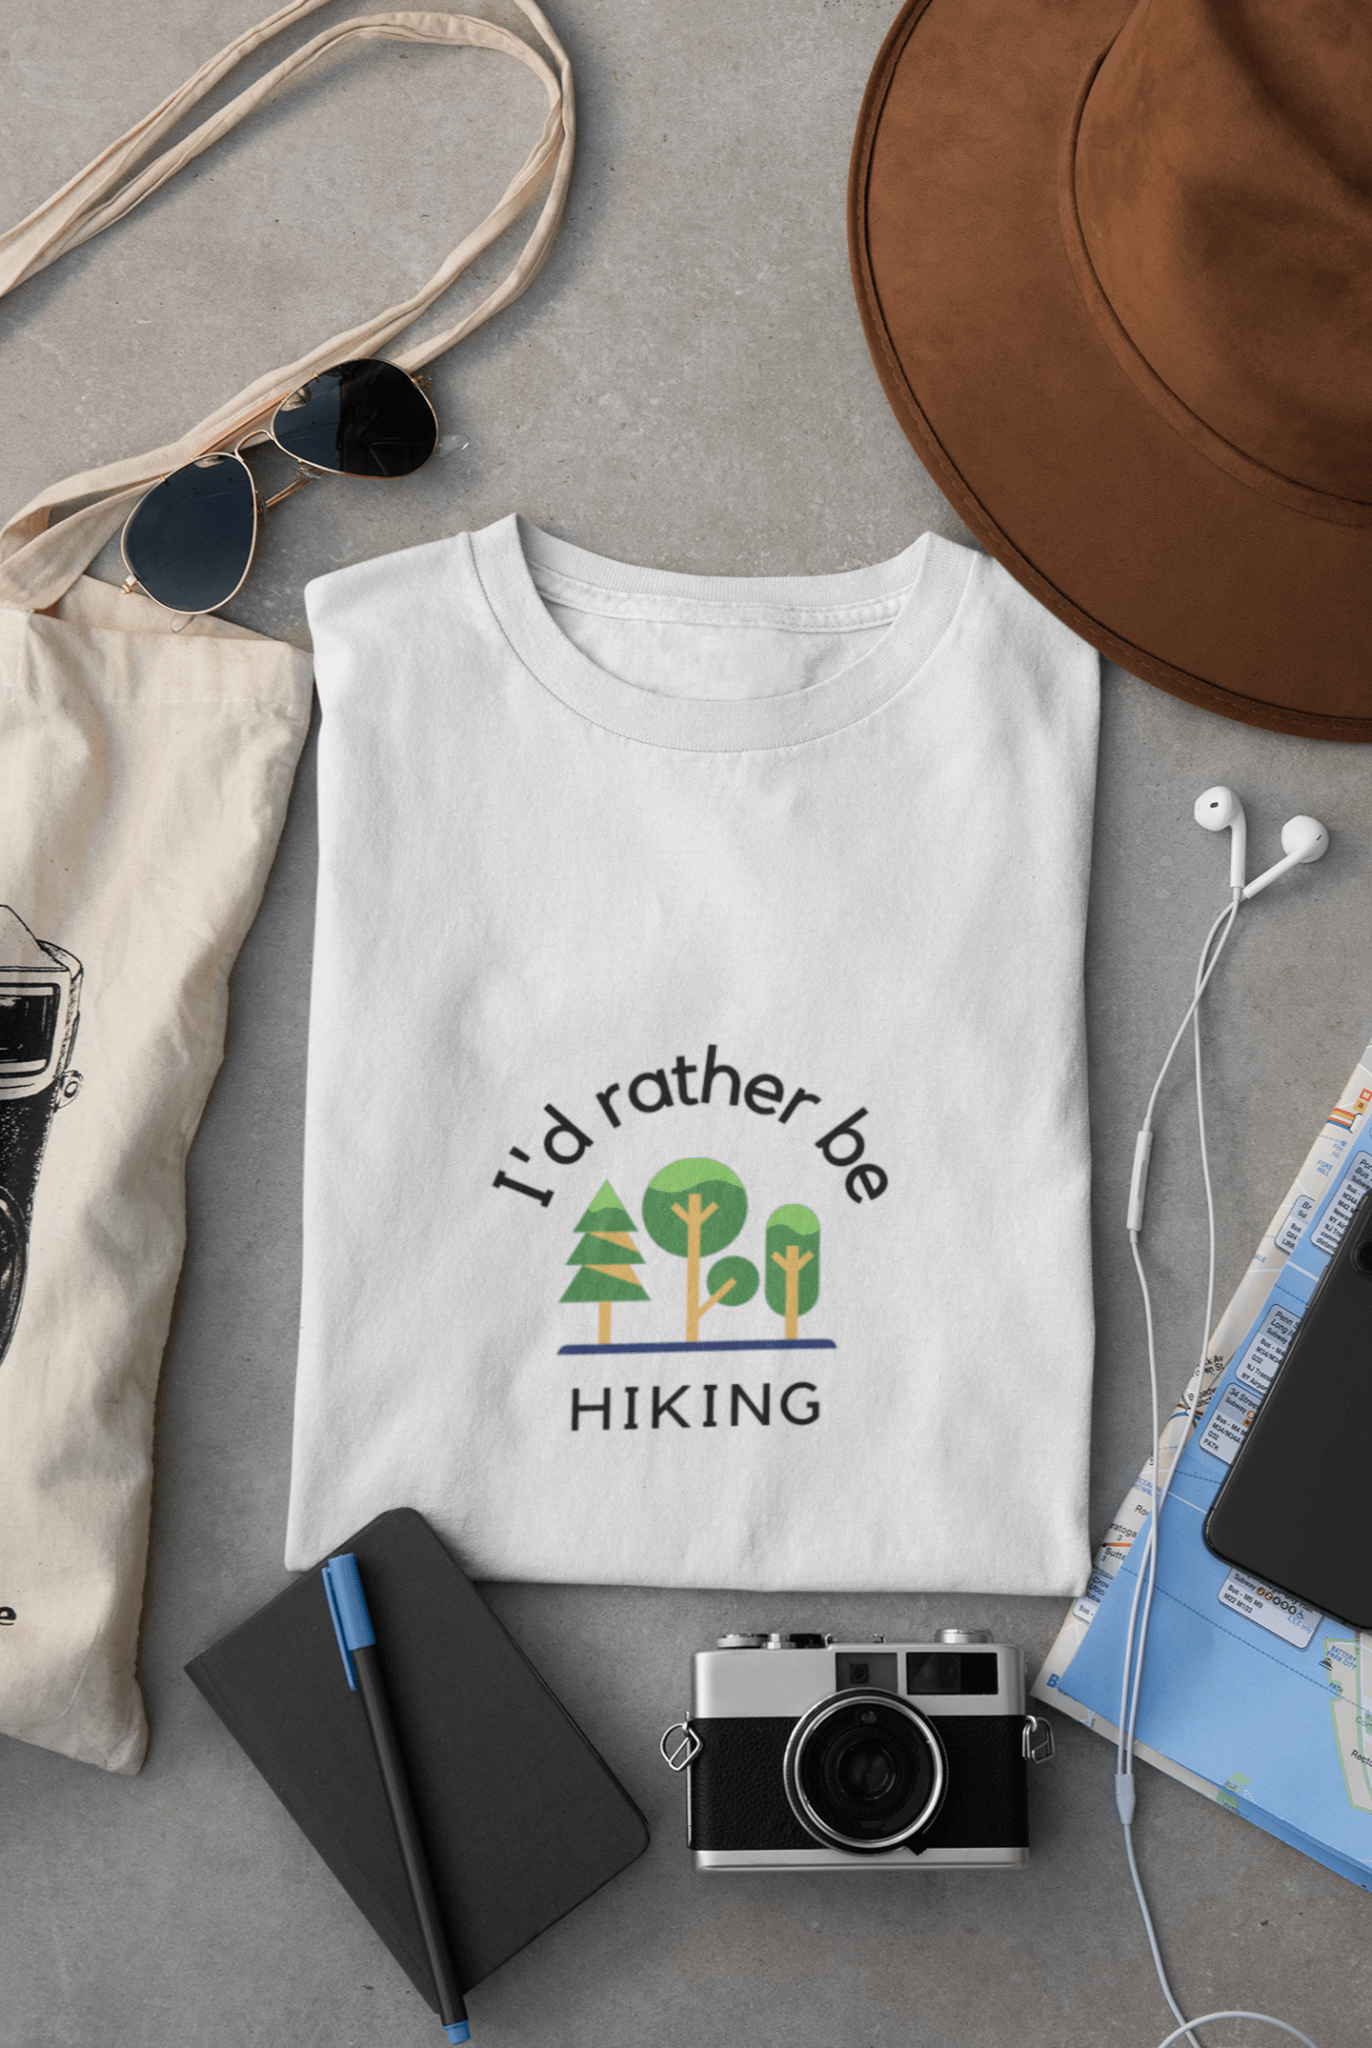 Folder white T-shirts with print "I'd rather be hiking" placed between travel accessories.